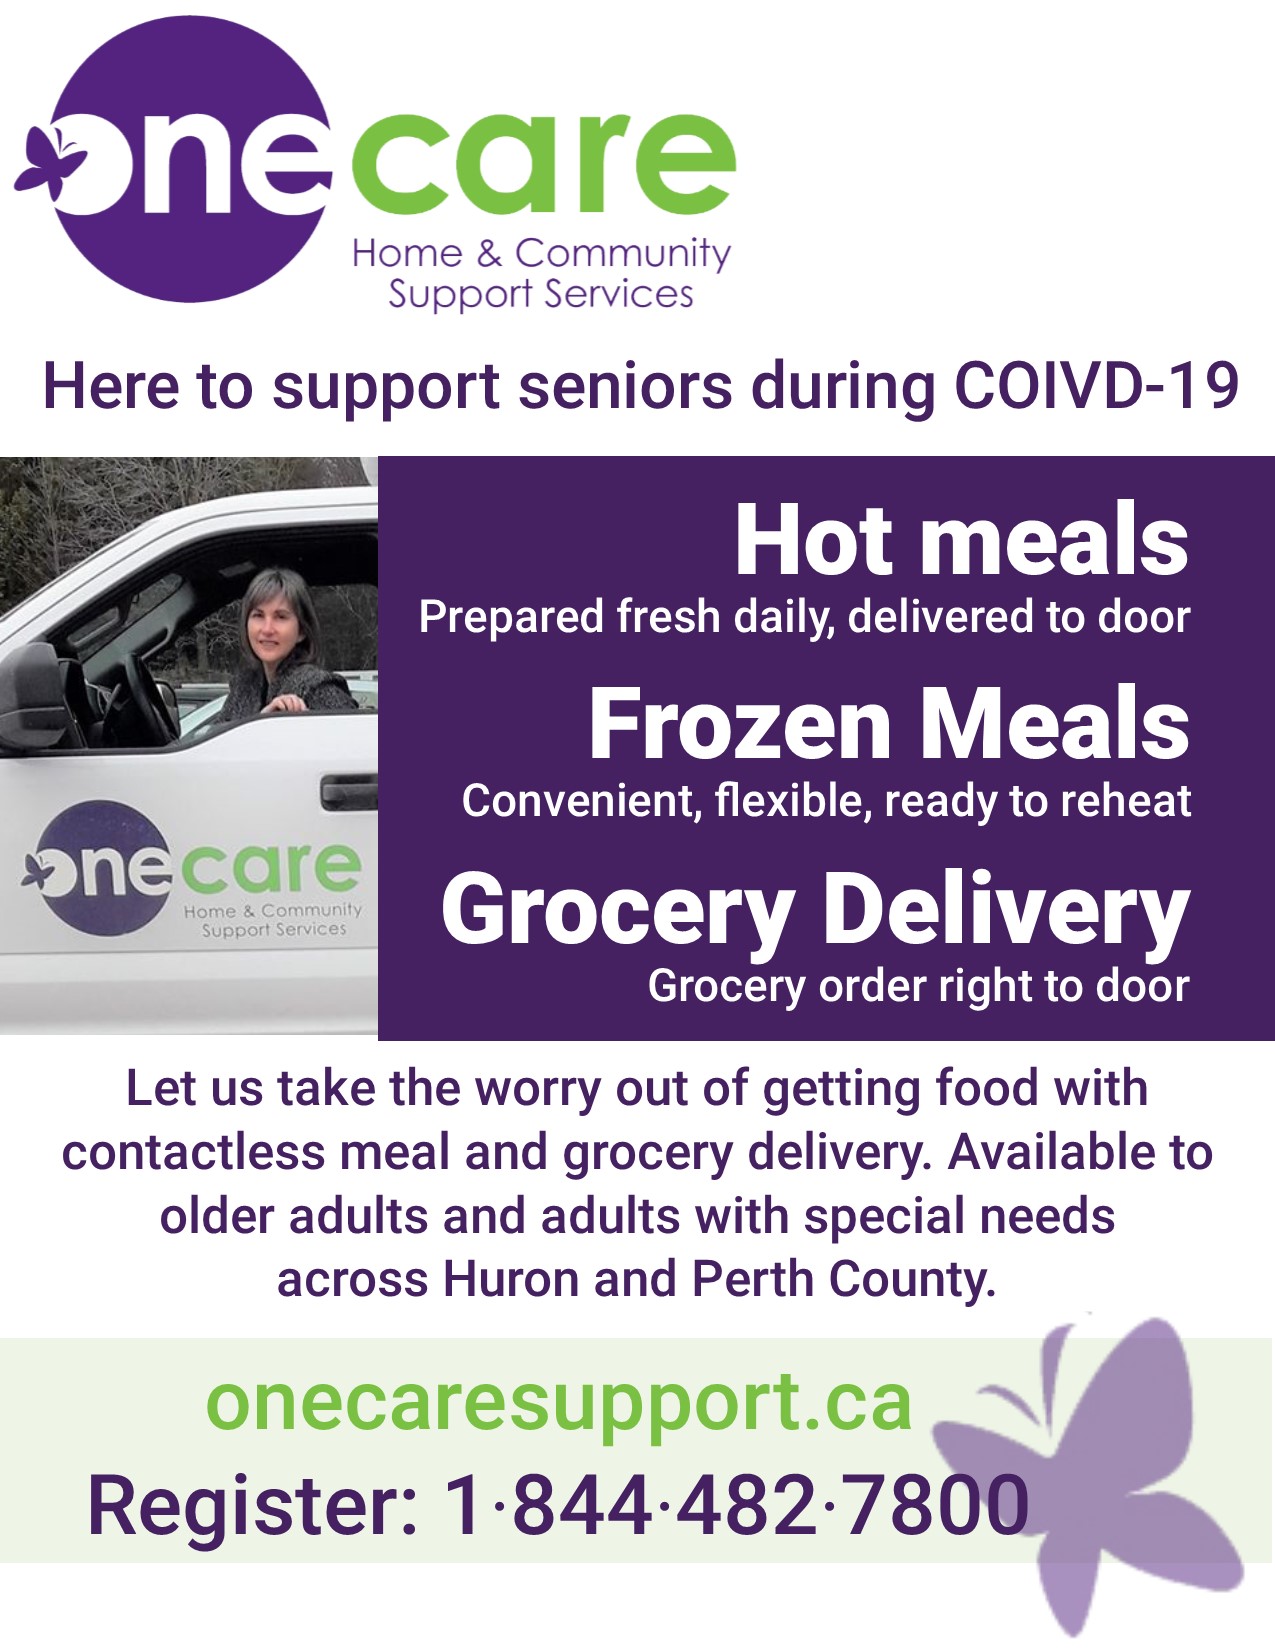 One Care Grocery Delivery Poster